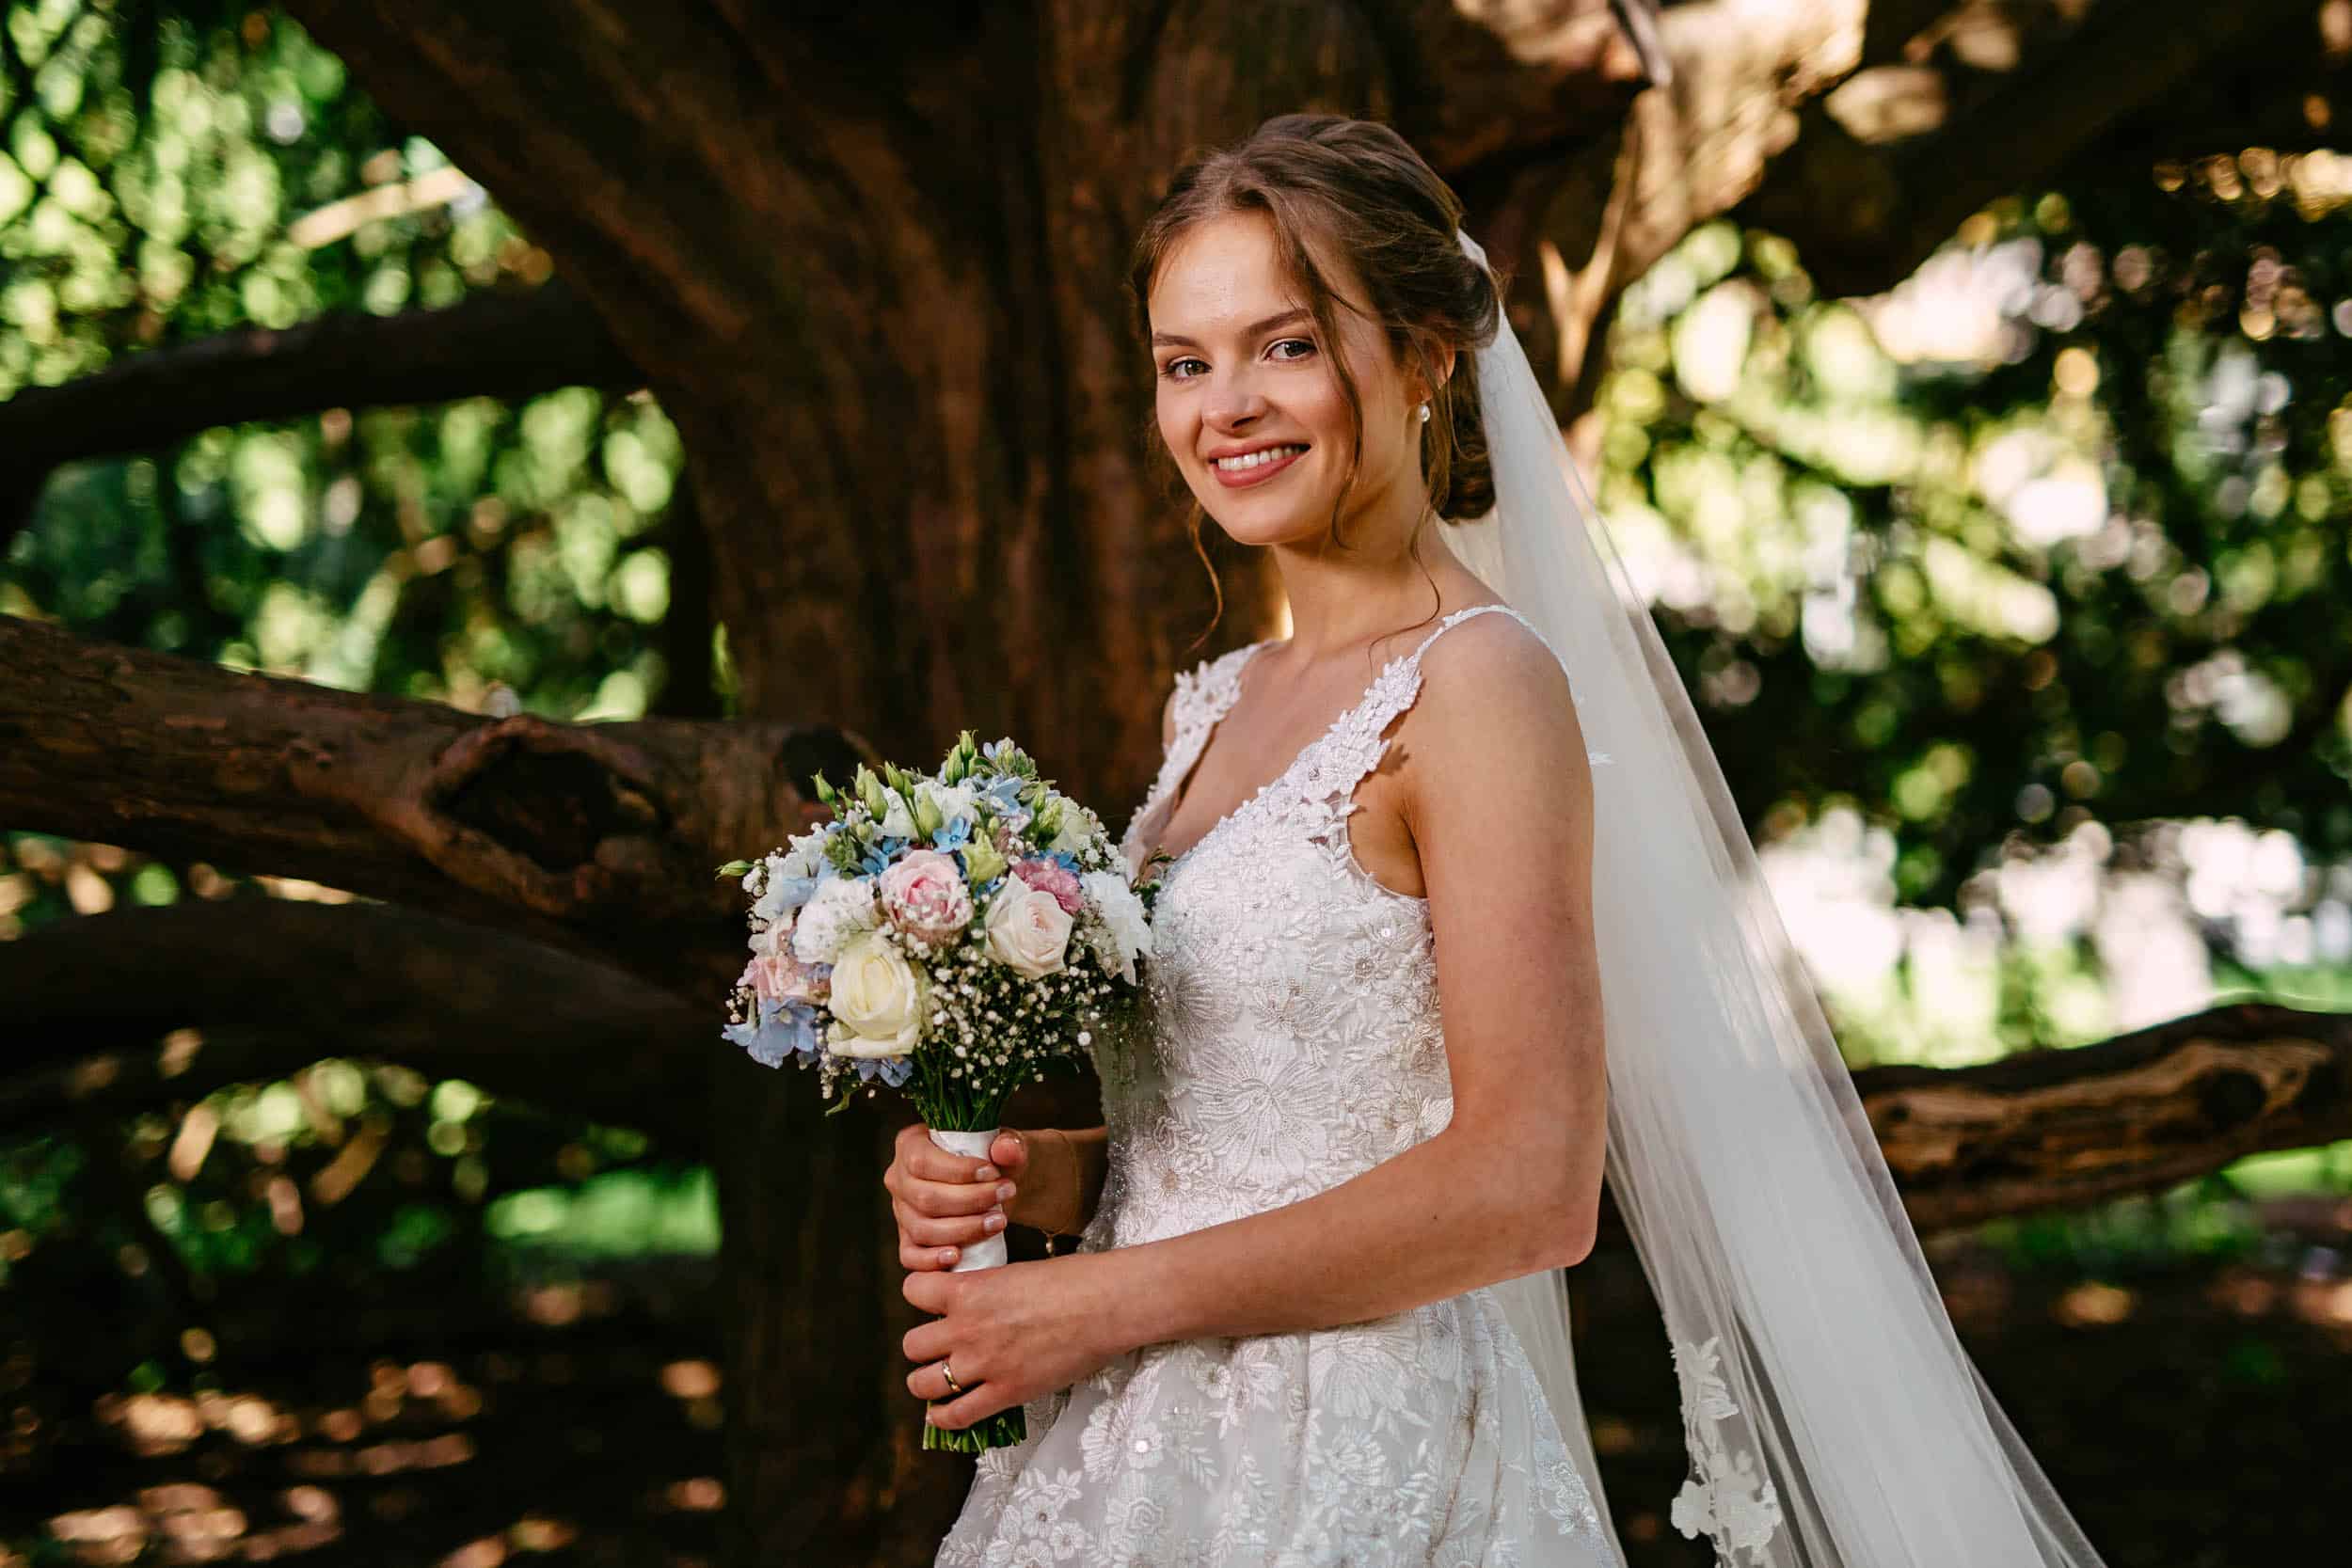 A bride with a bouquet in front of a tree at Wedding Botanical Garden Delft.